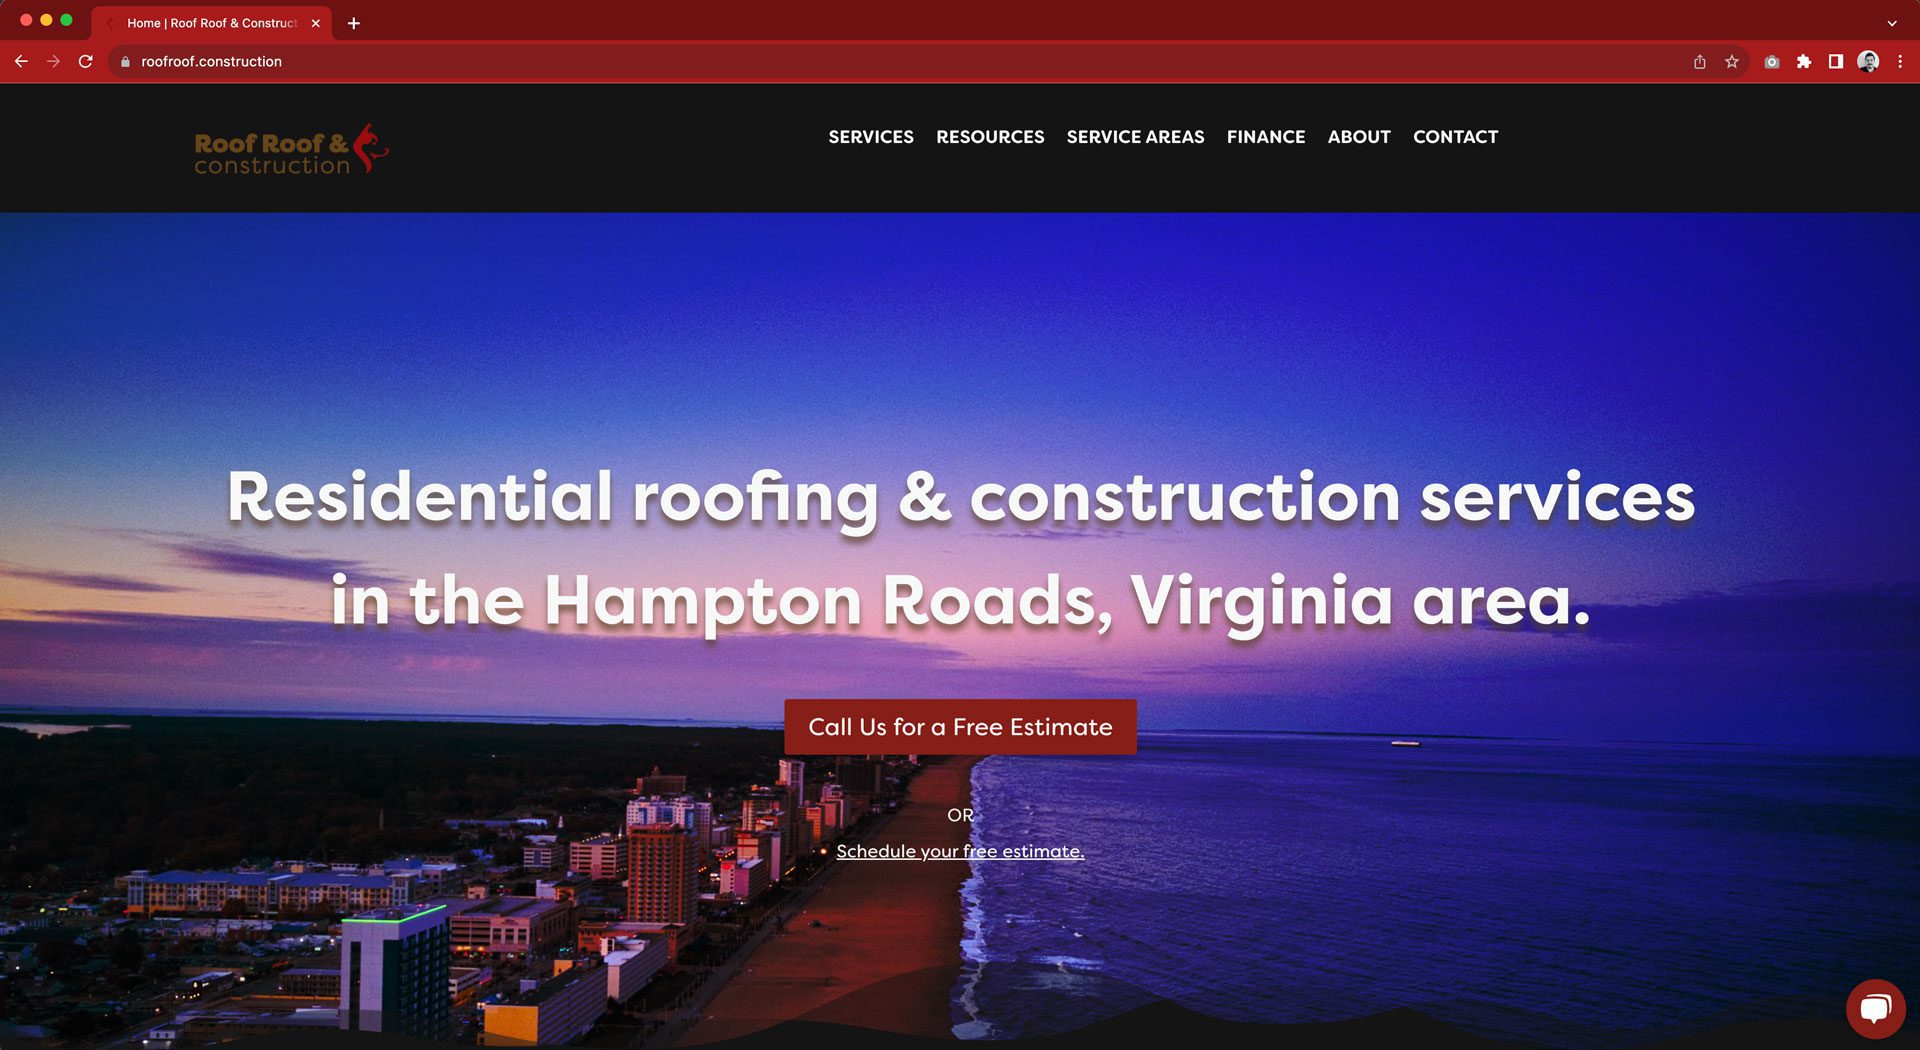 Roof Roof & Construction website home page.